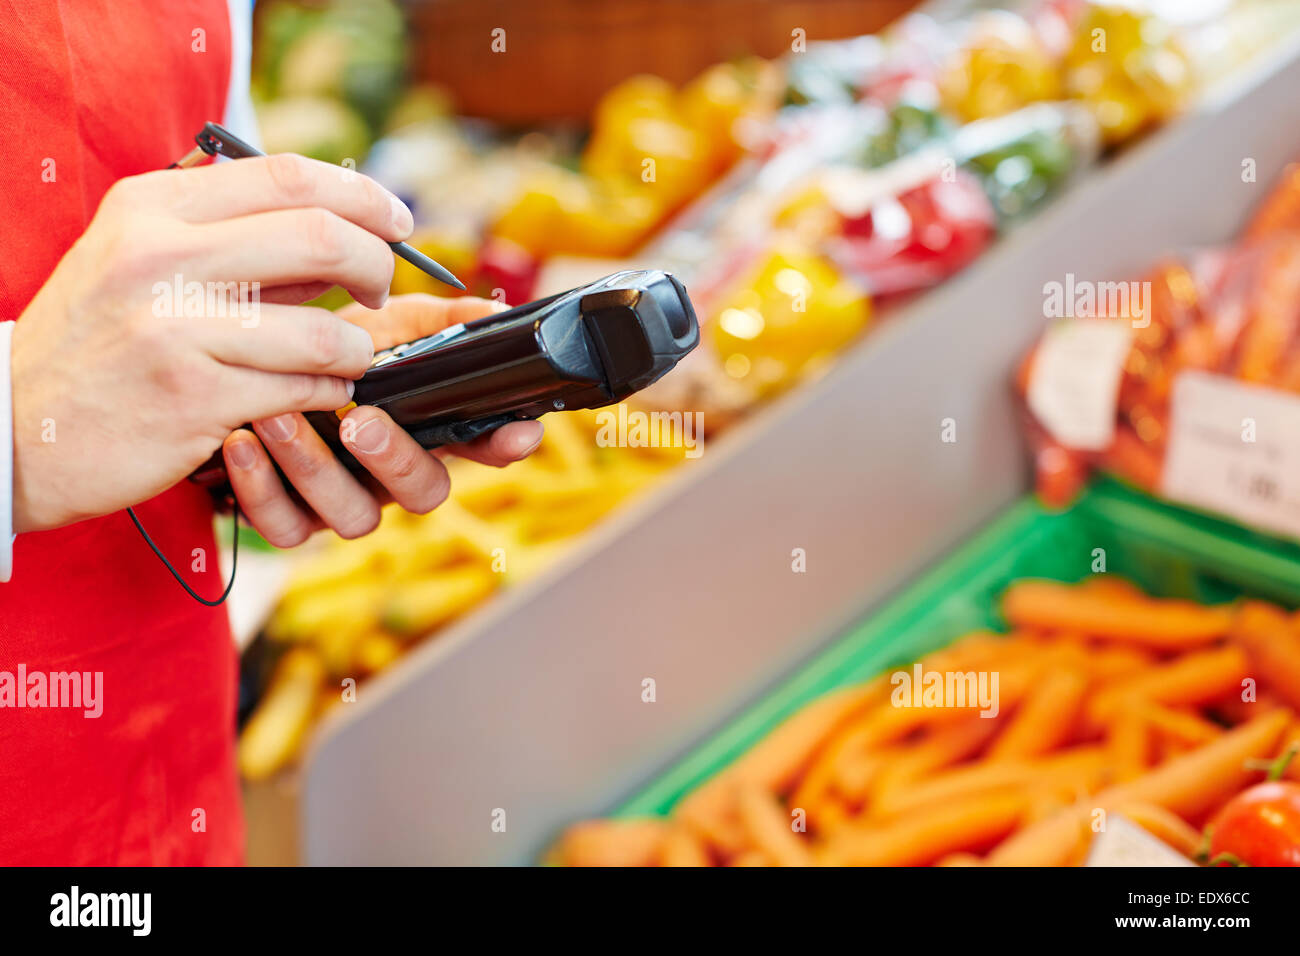 Hand holding mobile data registration terminal in a supermarket Stock Photo